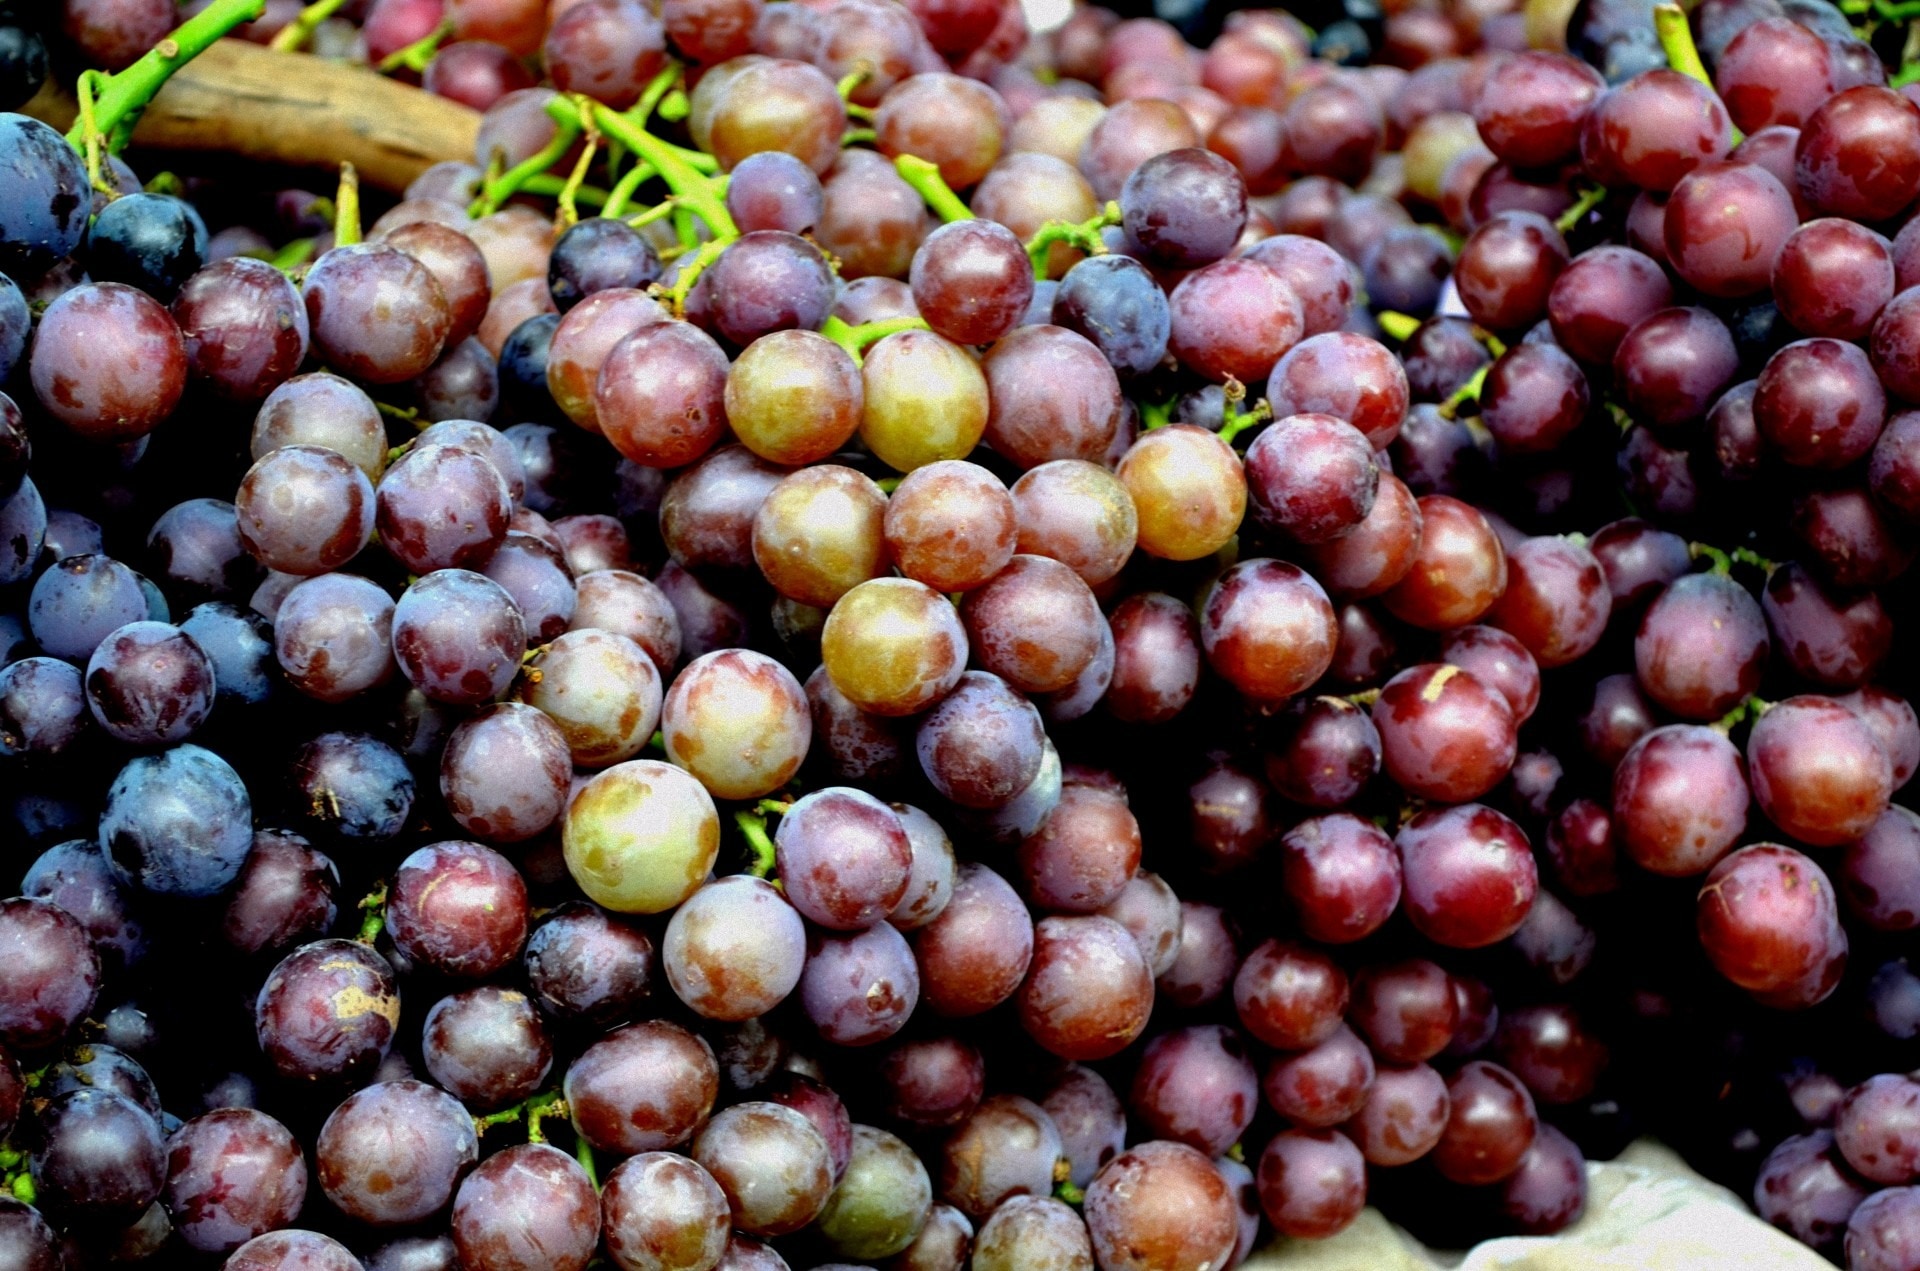 bunch of ripe grapes